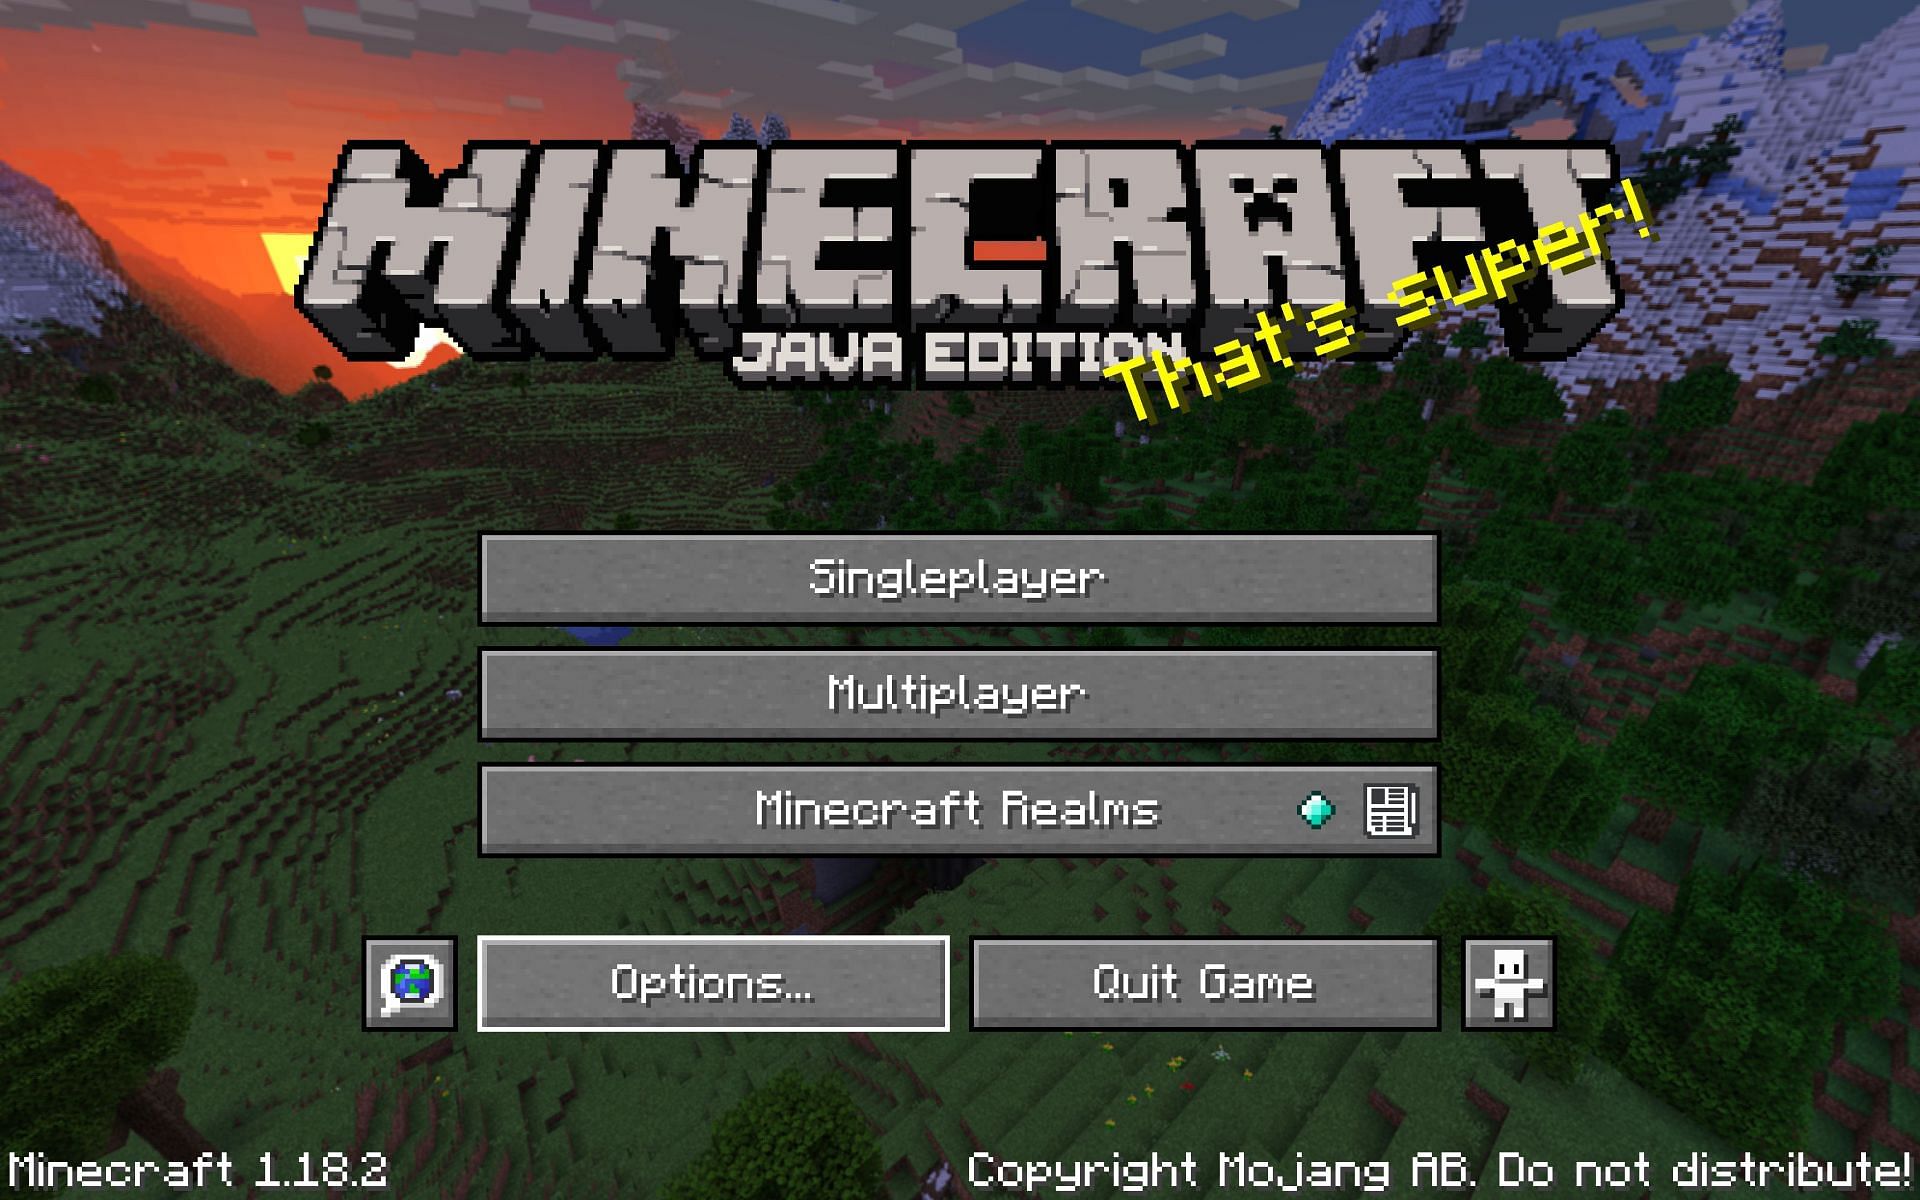 Players should open the launcher and then launch the game before proceeding to select the options button on the screen (Image via Minecraft)